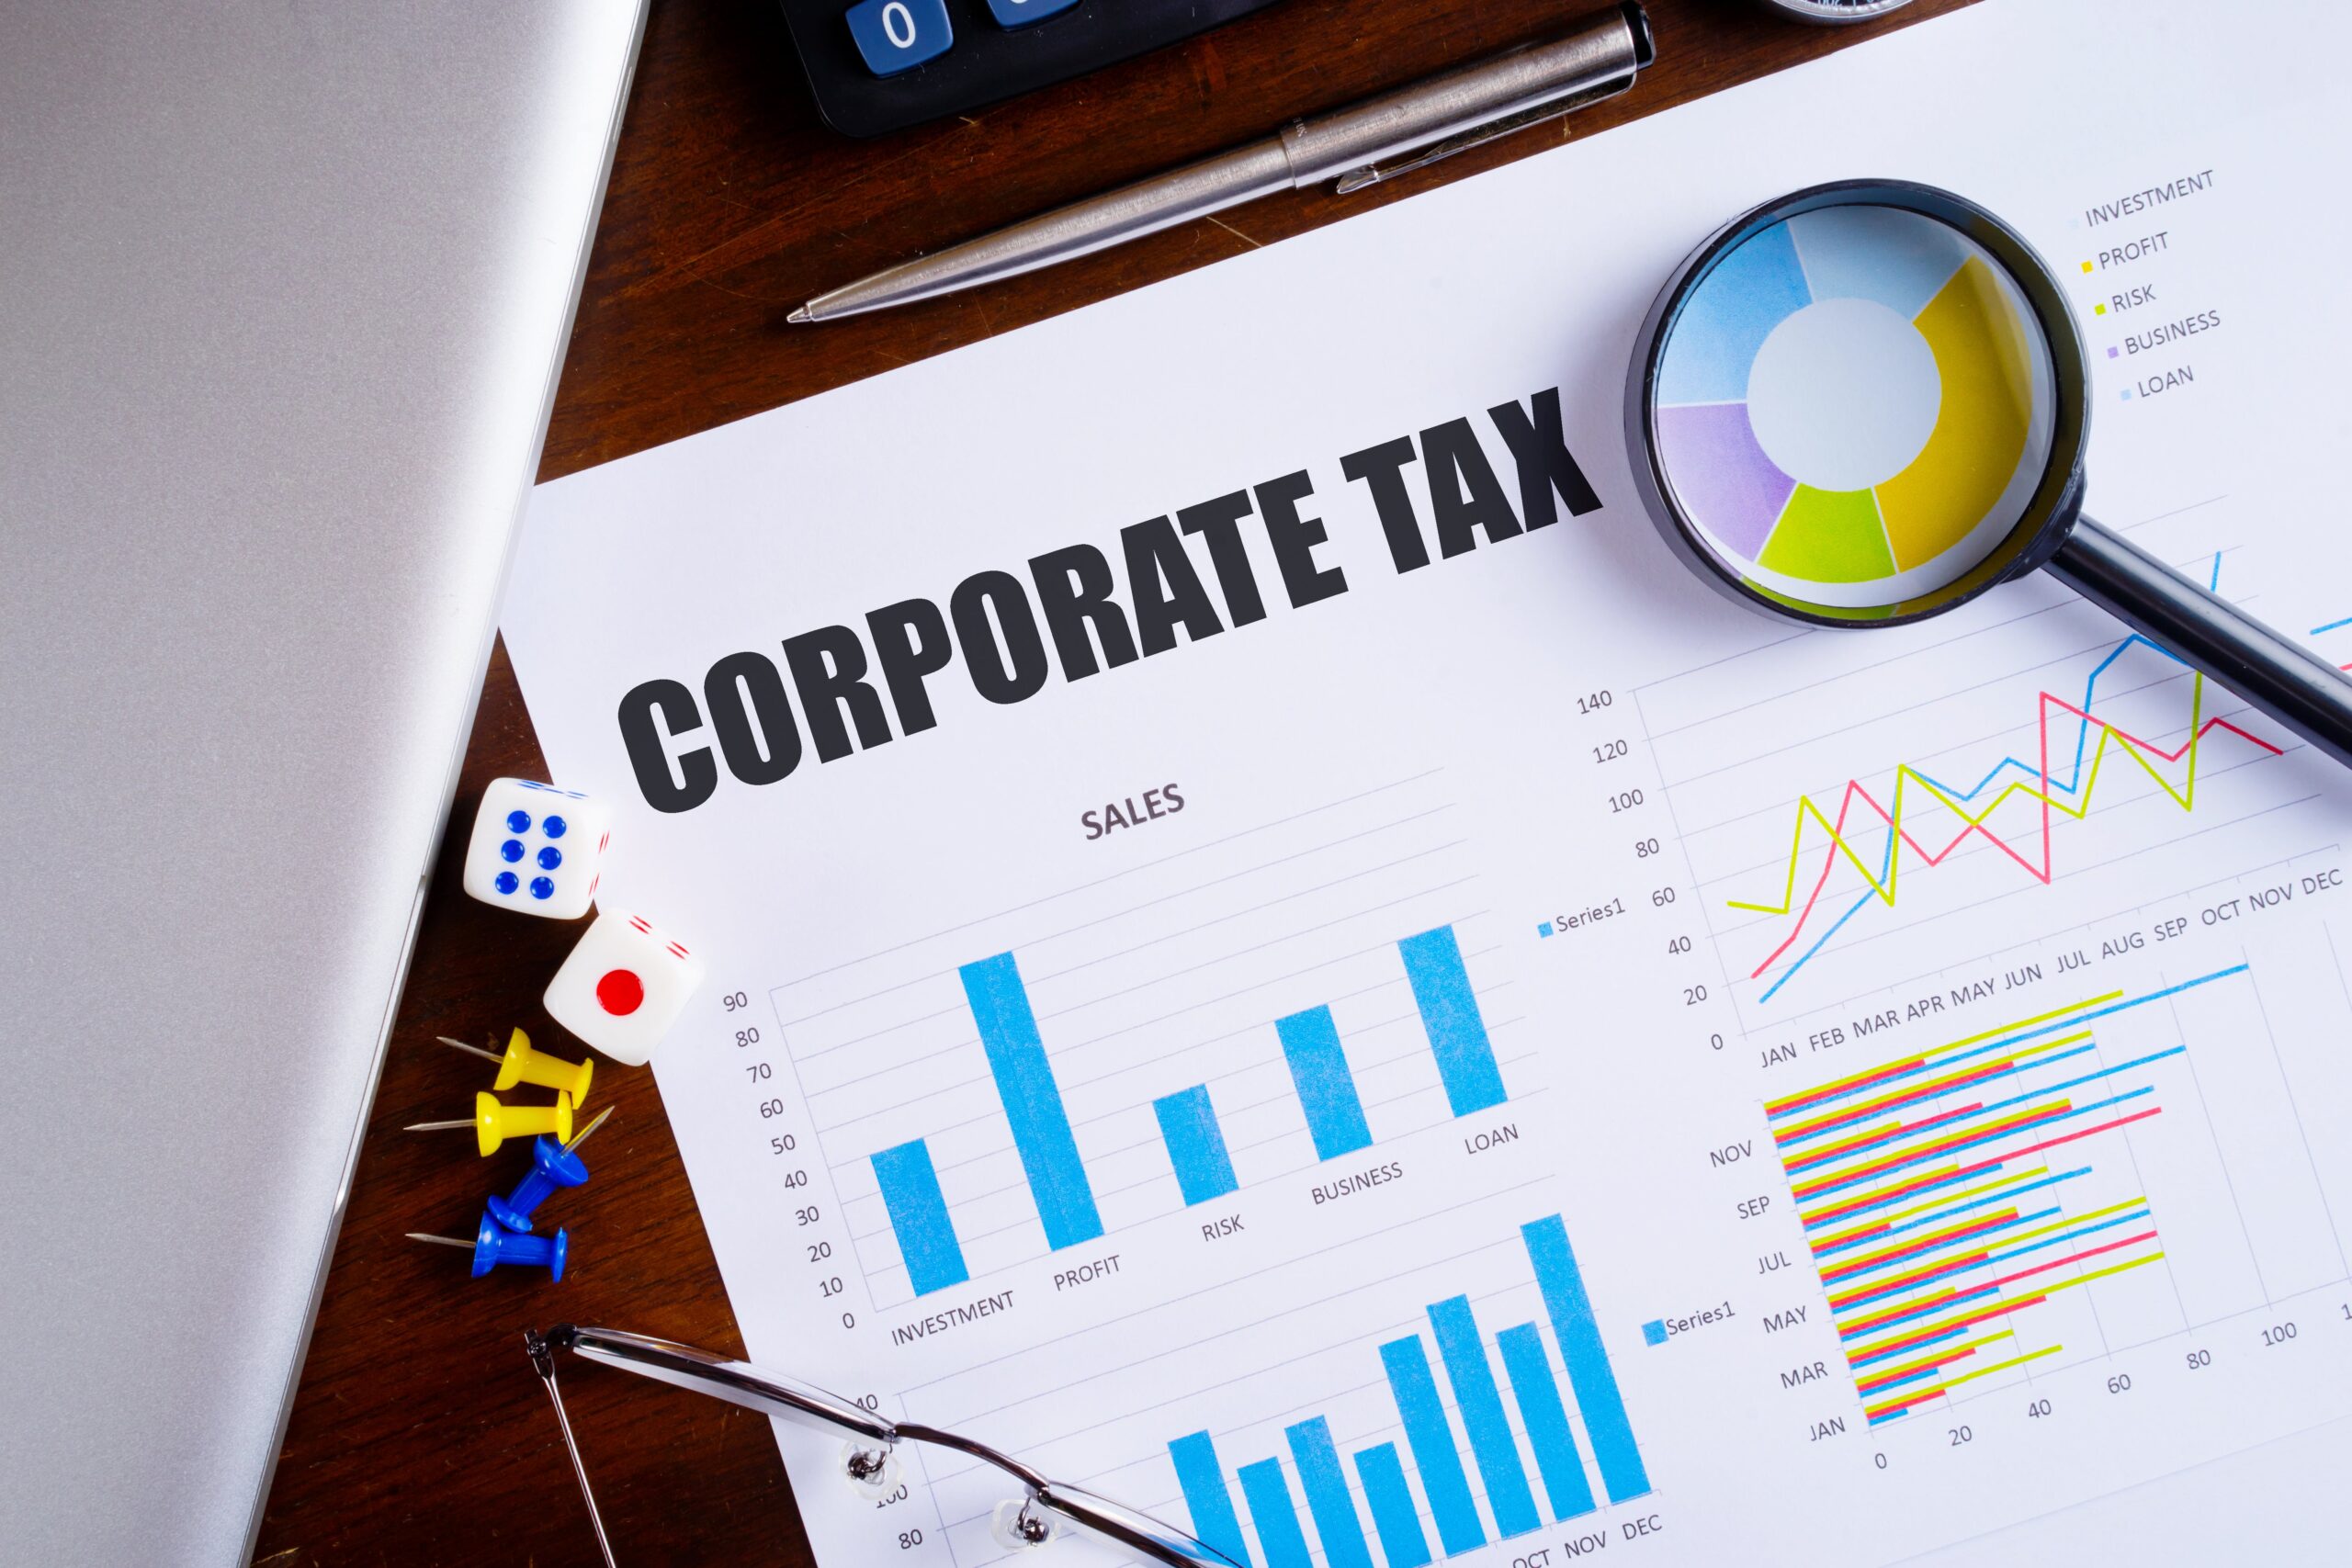 Under Corporation Tax Self-Assessment (CTSA), the legal responsibility for calculating